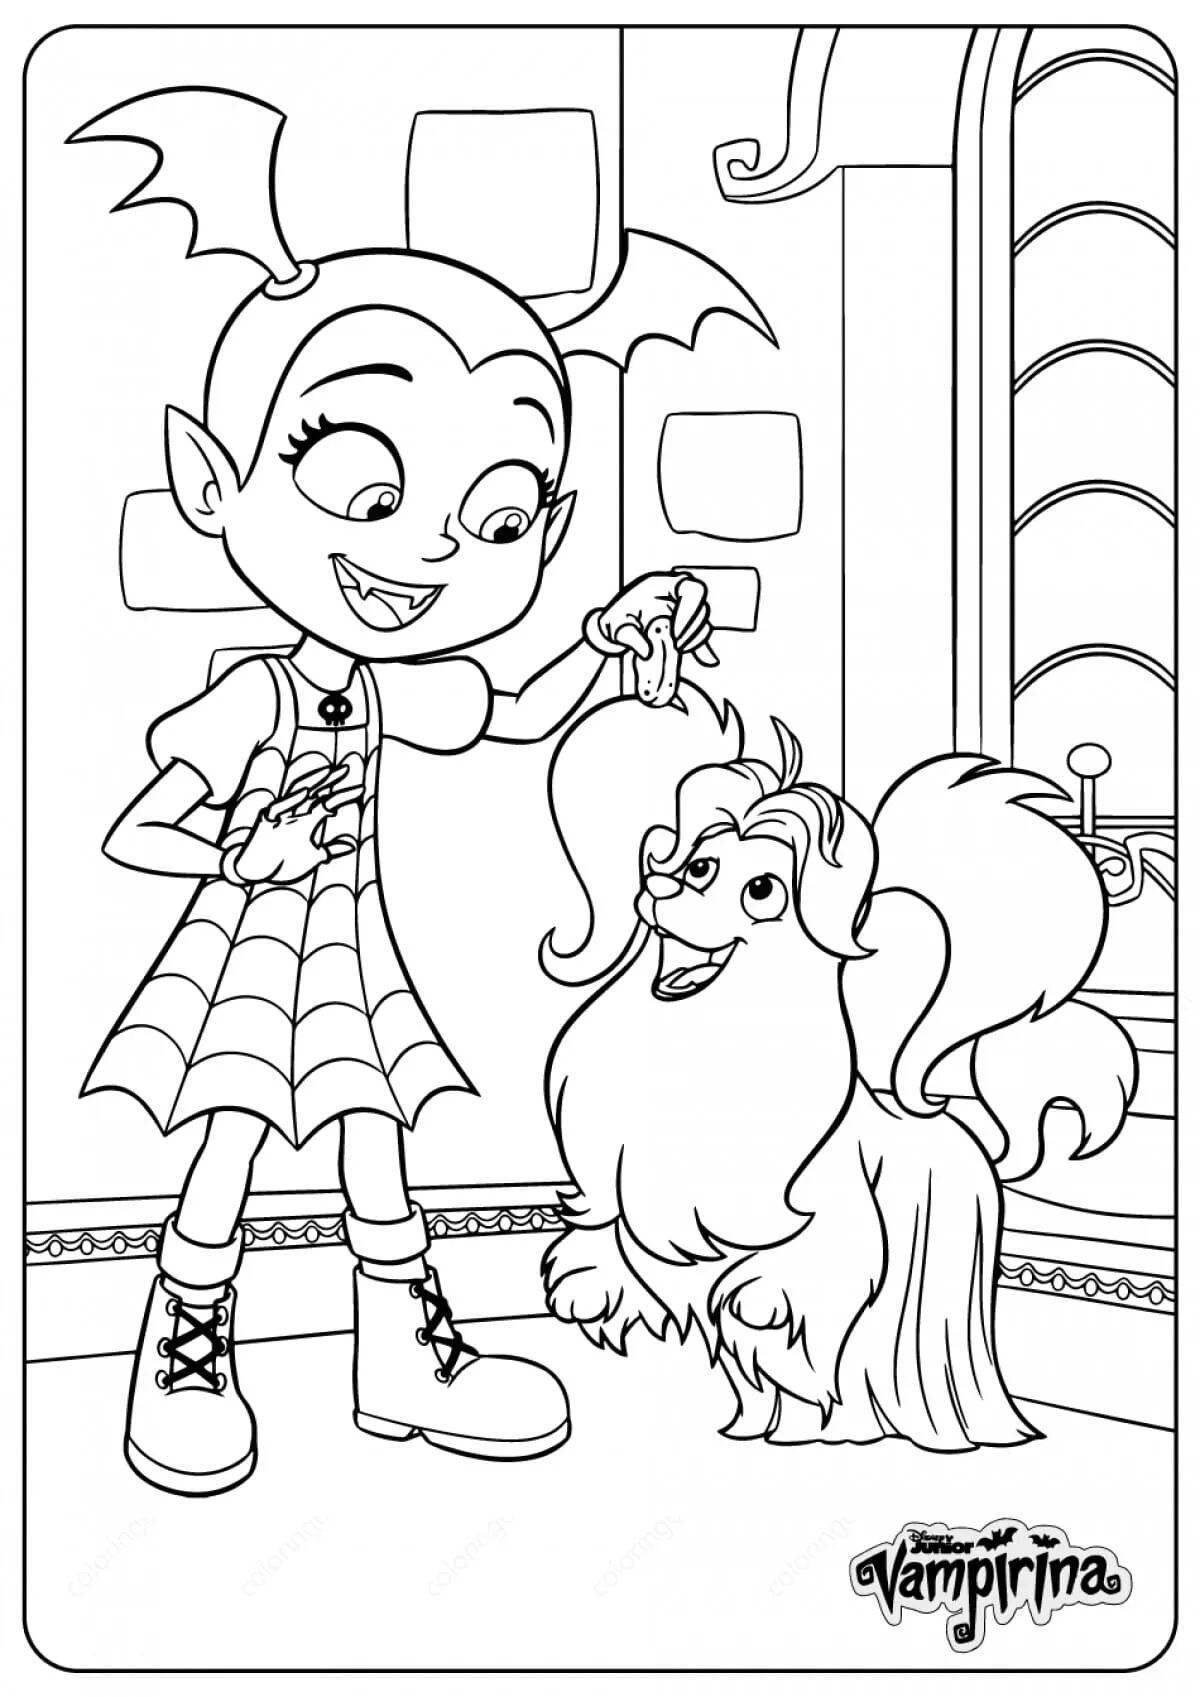 Charming baby vee coloring book